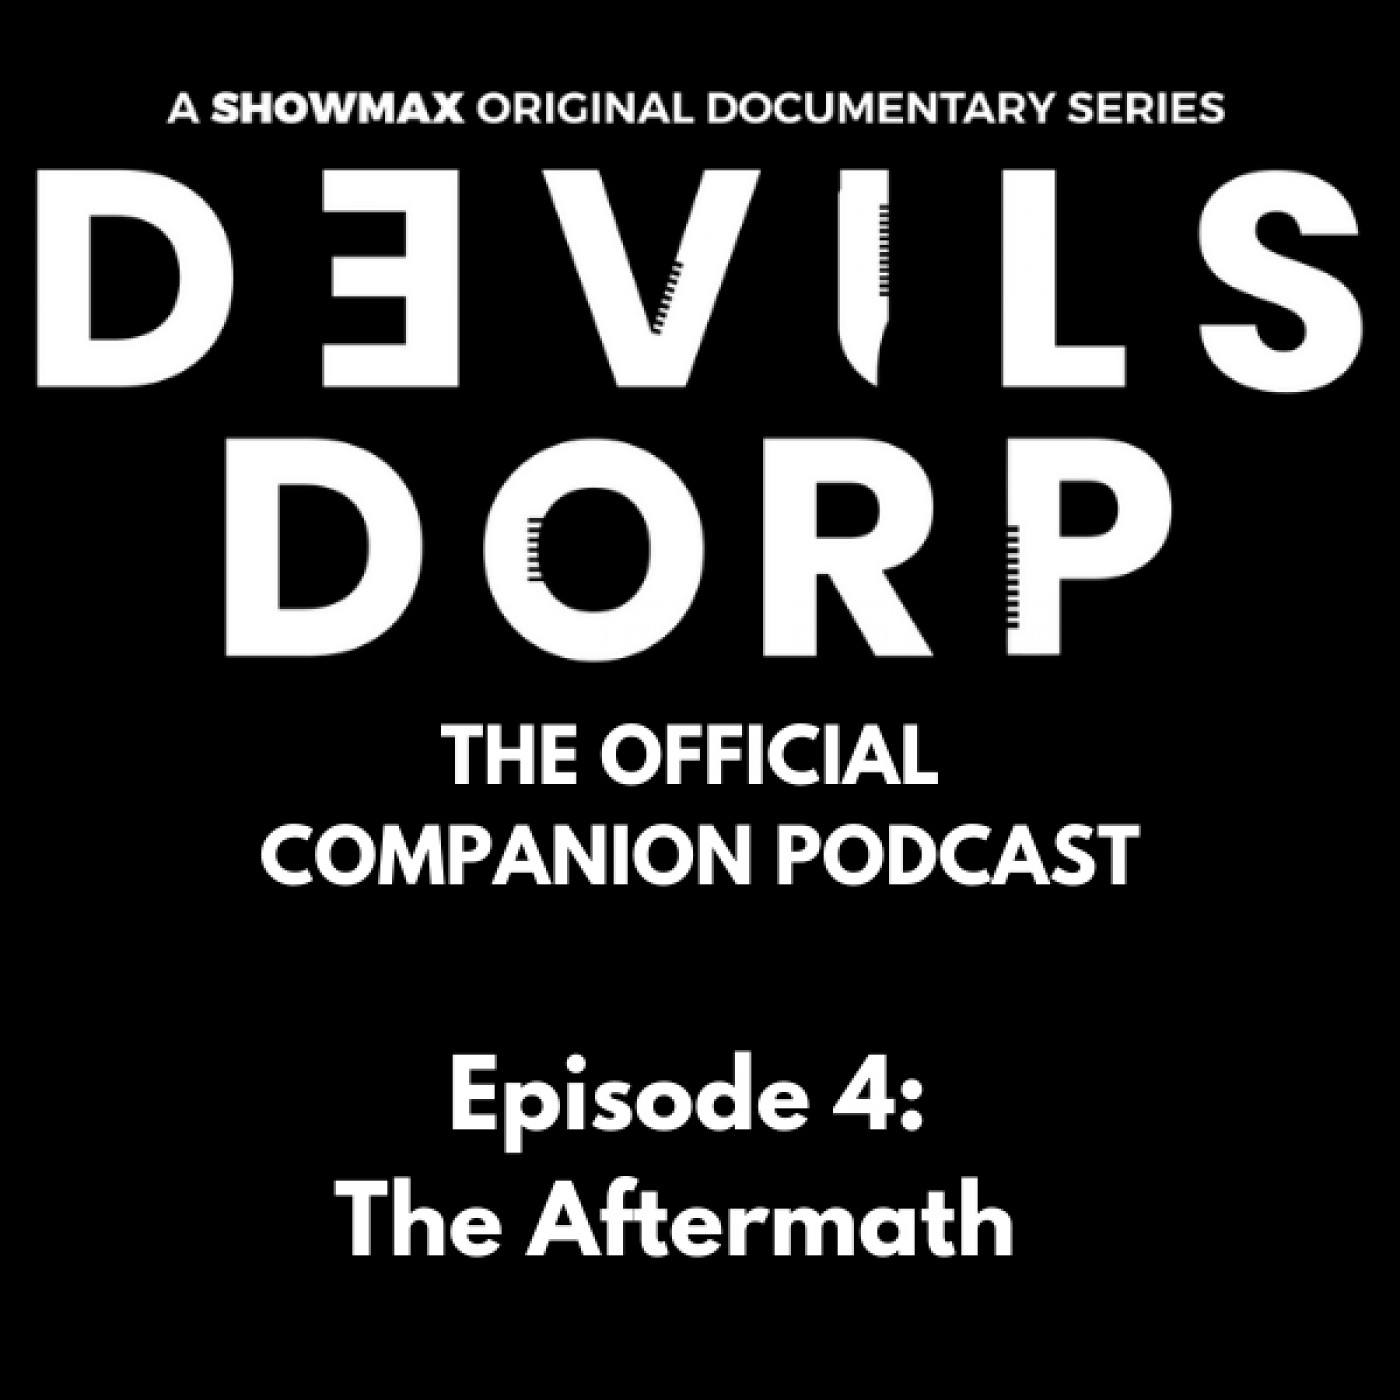 Episode 4: The Aftermath